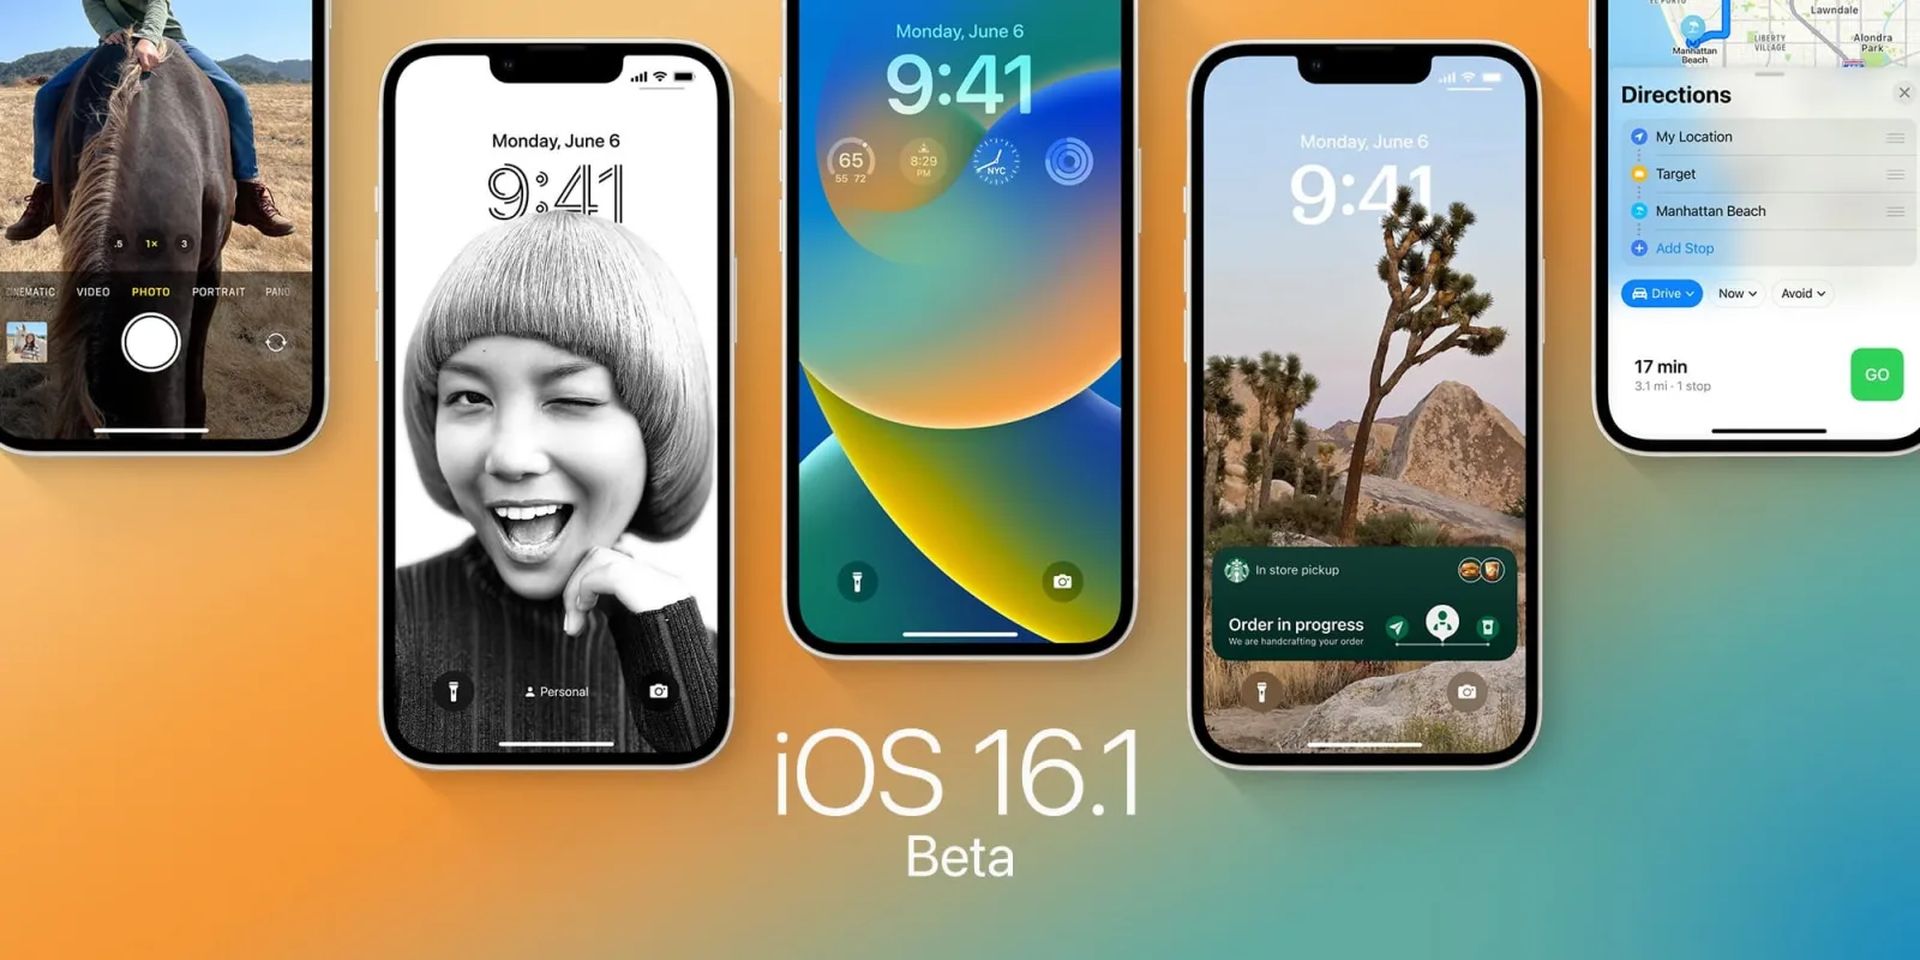 Today, we are going to be going over the new iOS 16.1 features and changes, which is currently in Beta testing and will be available afterwards.